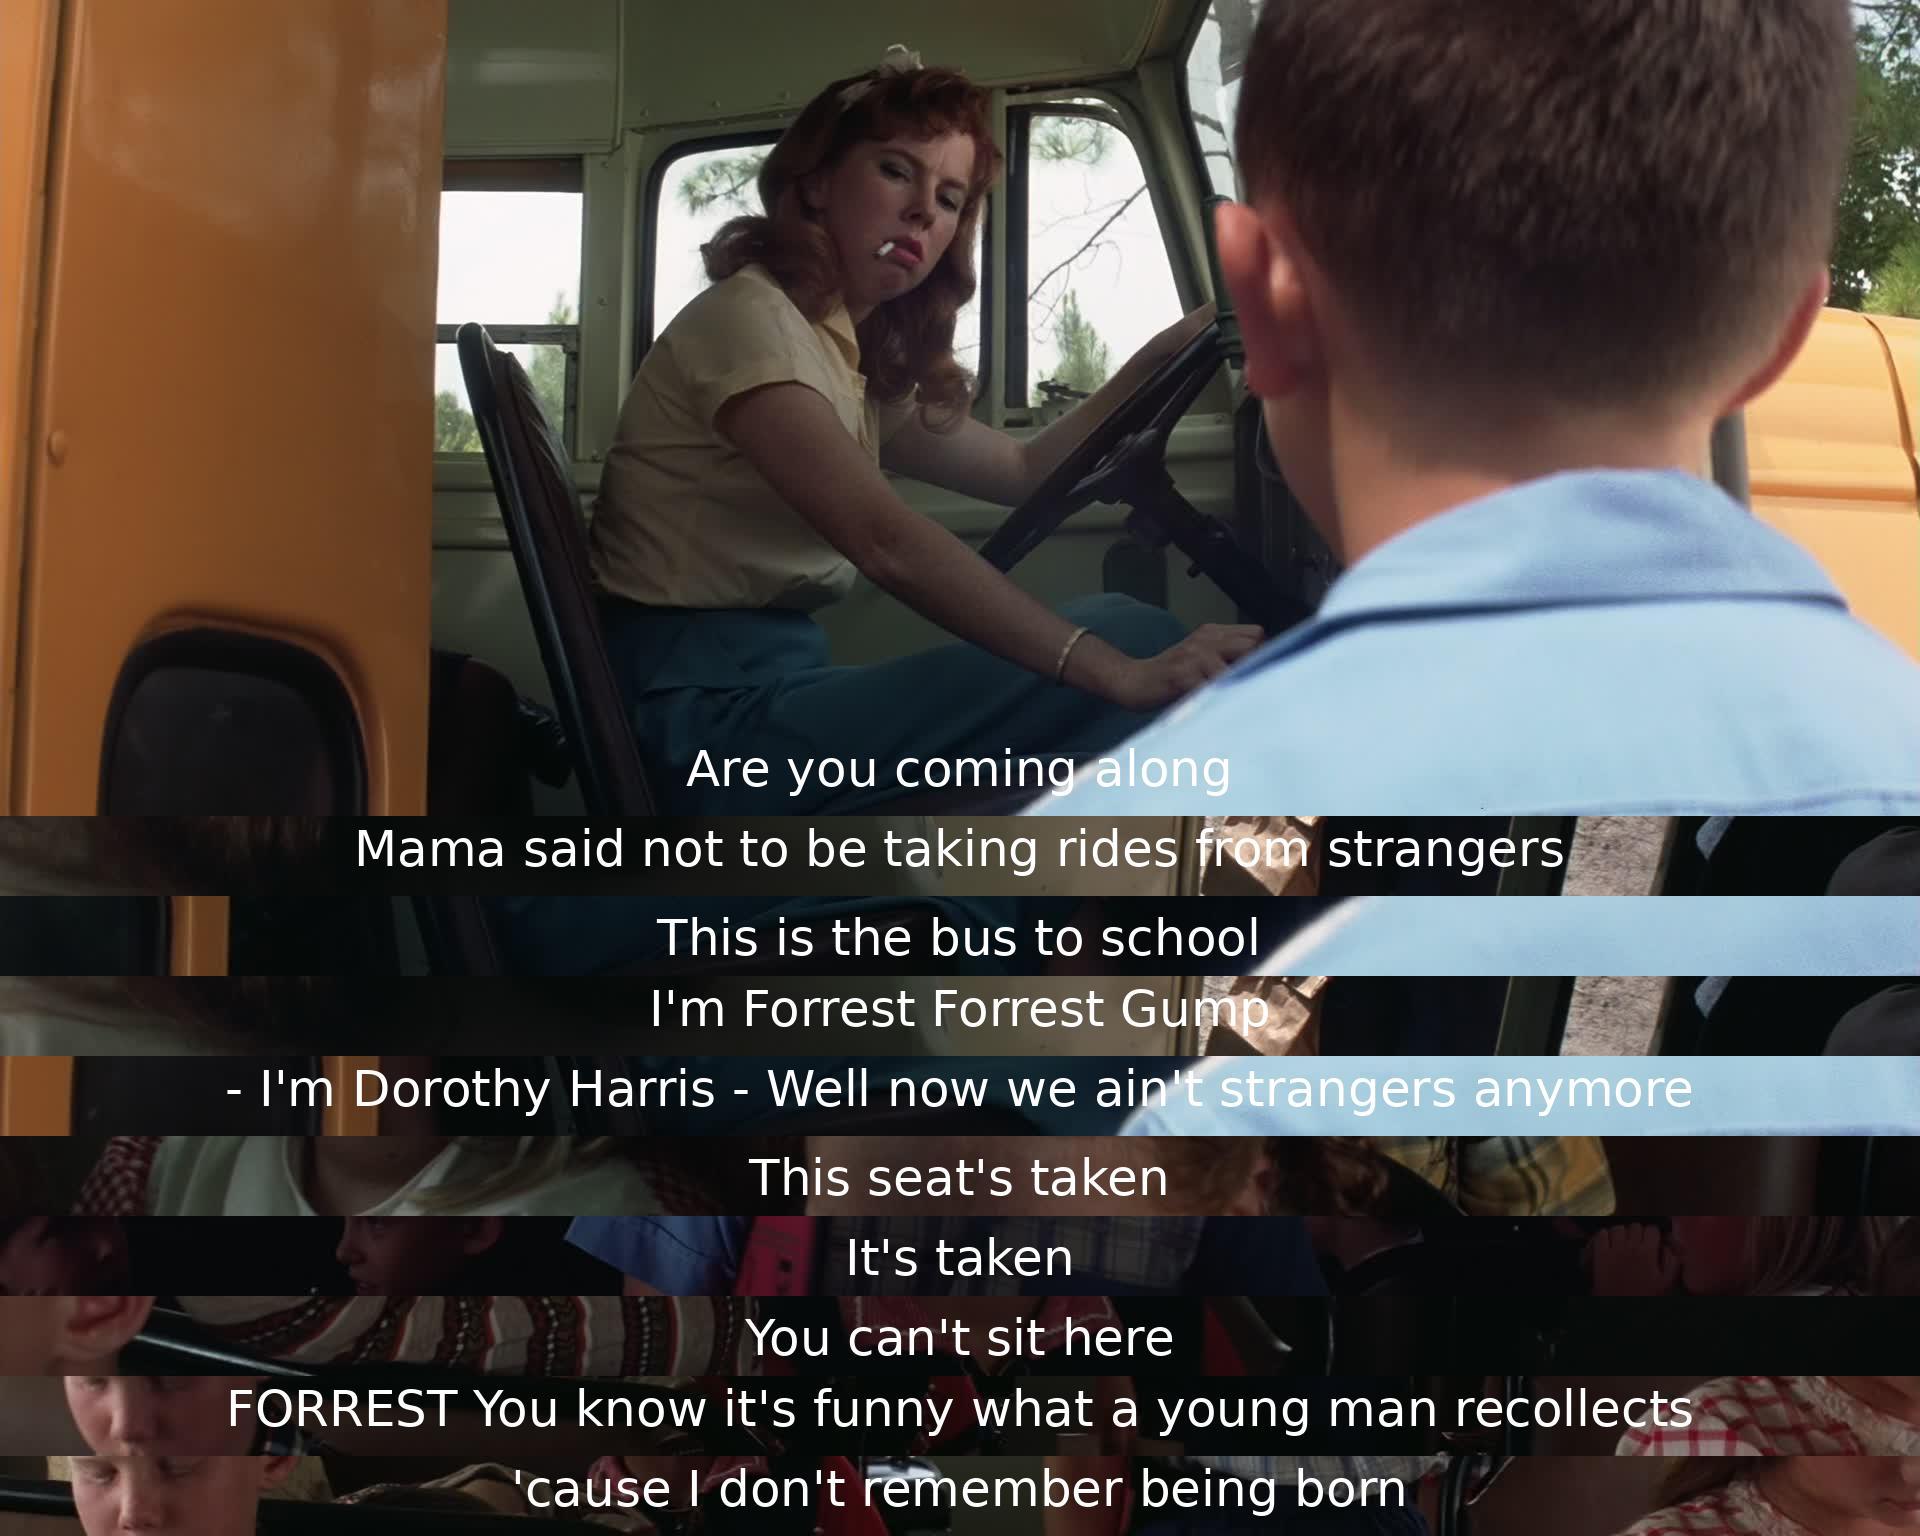 A young man named Forrest Gump meets Dorothy on the bus to school. He tries to sit next to her but she refuses, claiming the seat is taken. Despite her initial reluctance, they strike up a conversation, and Forrest reflects on his childhood memories.